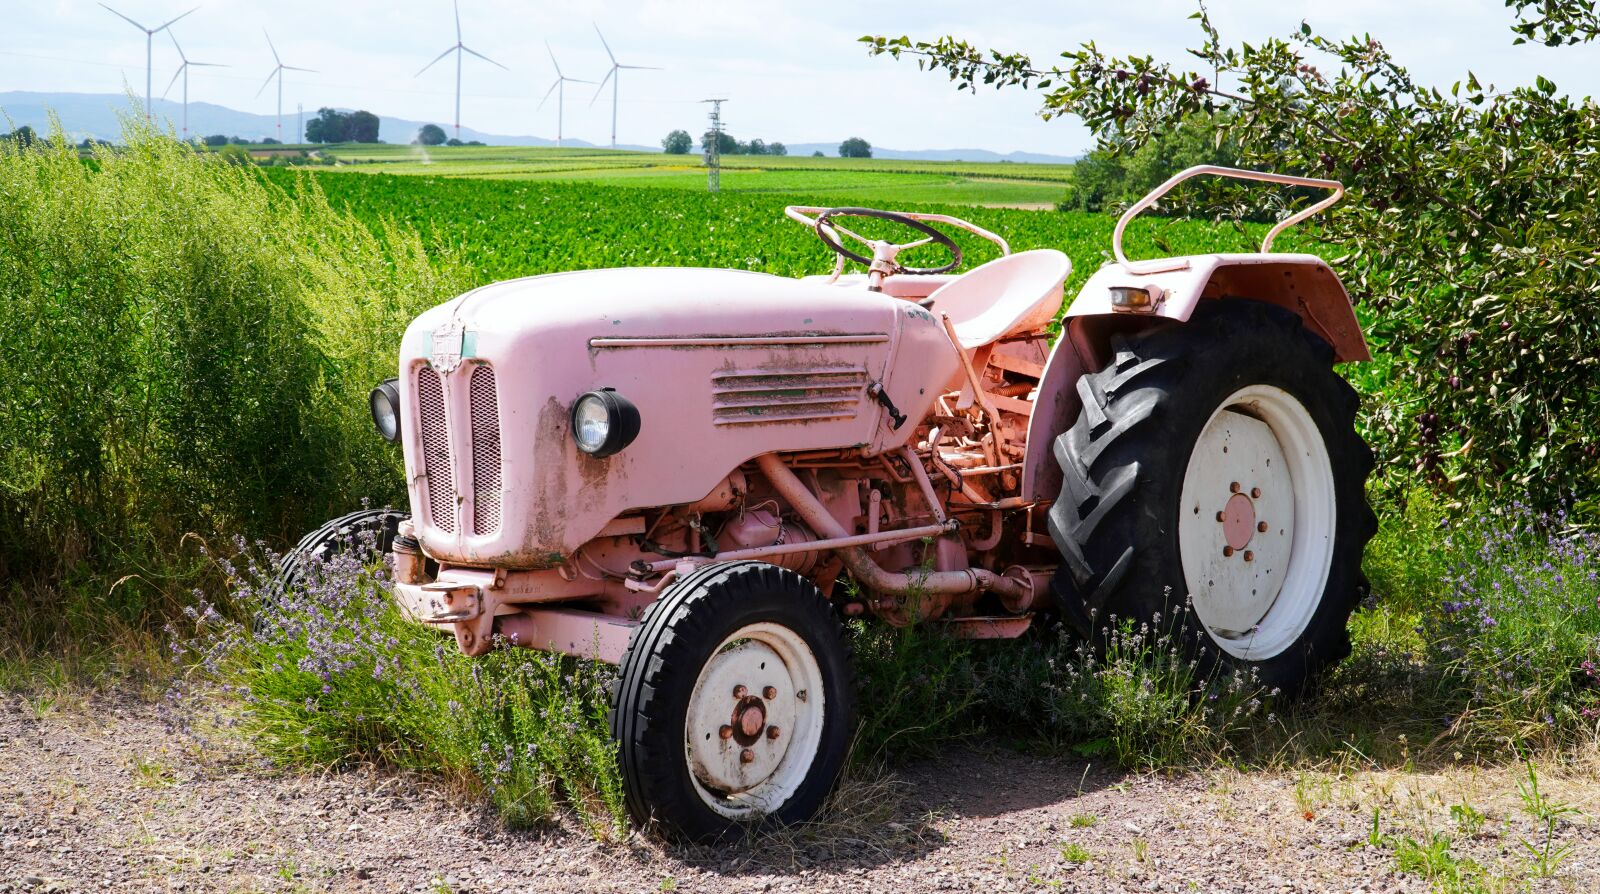 Sony a6400 sample photo. Tractor, pink, farm photography